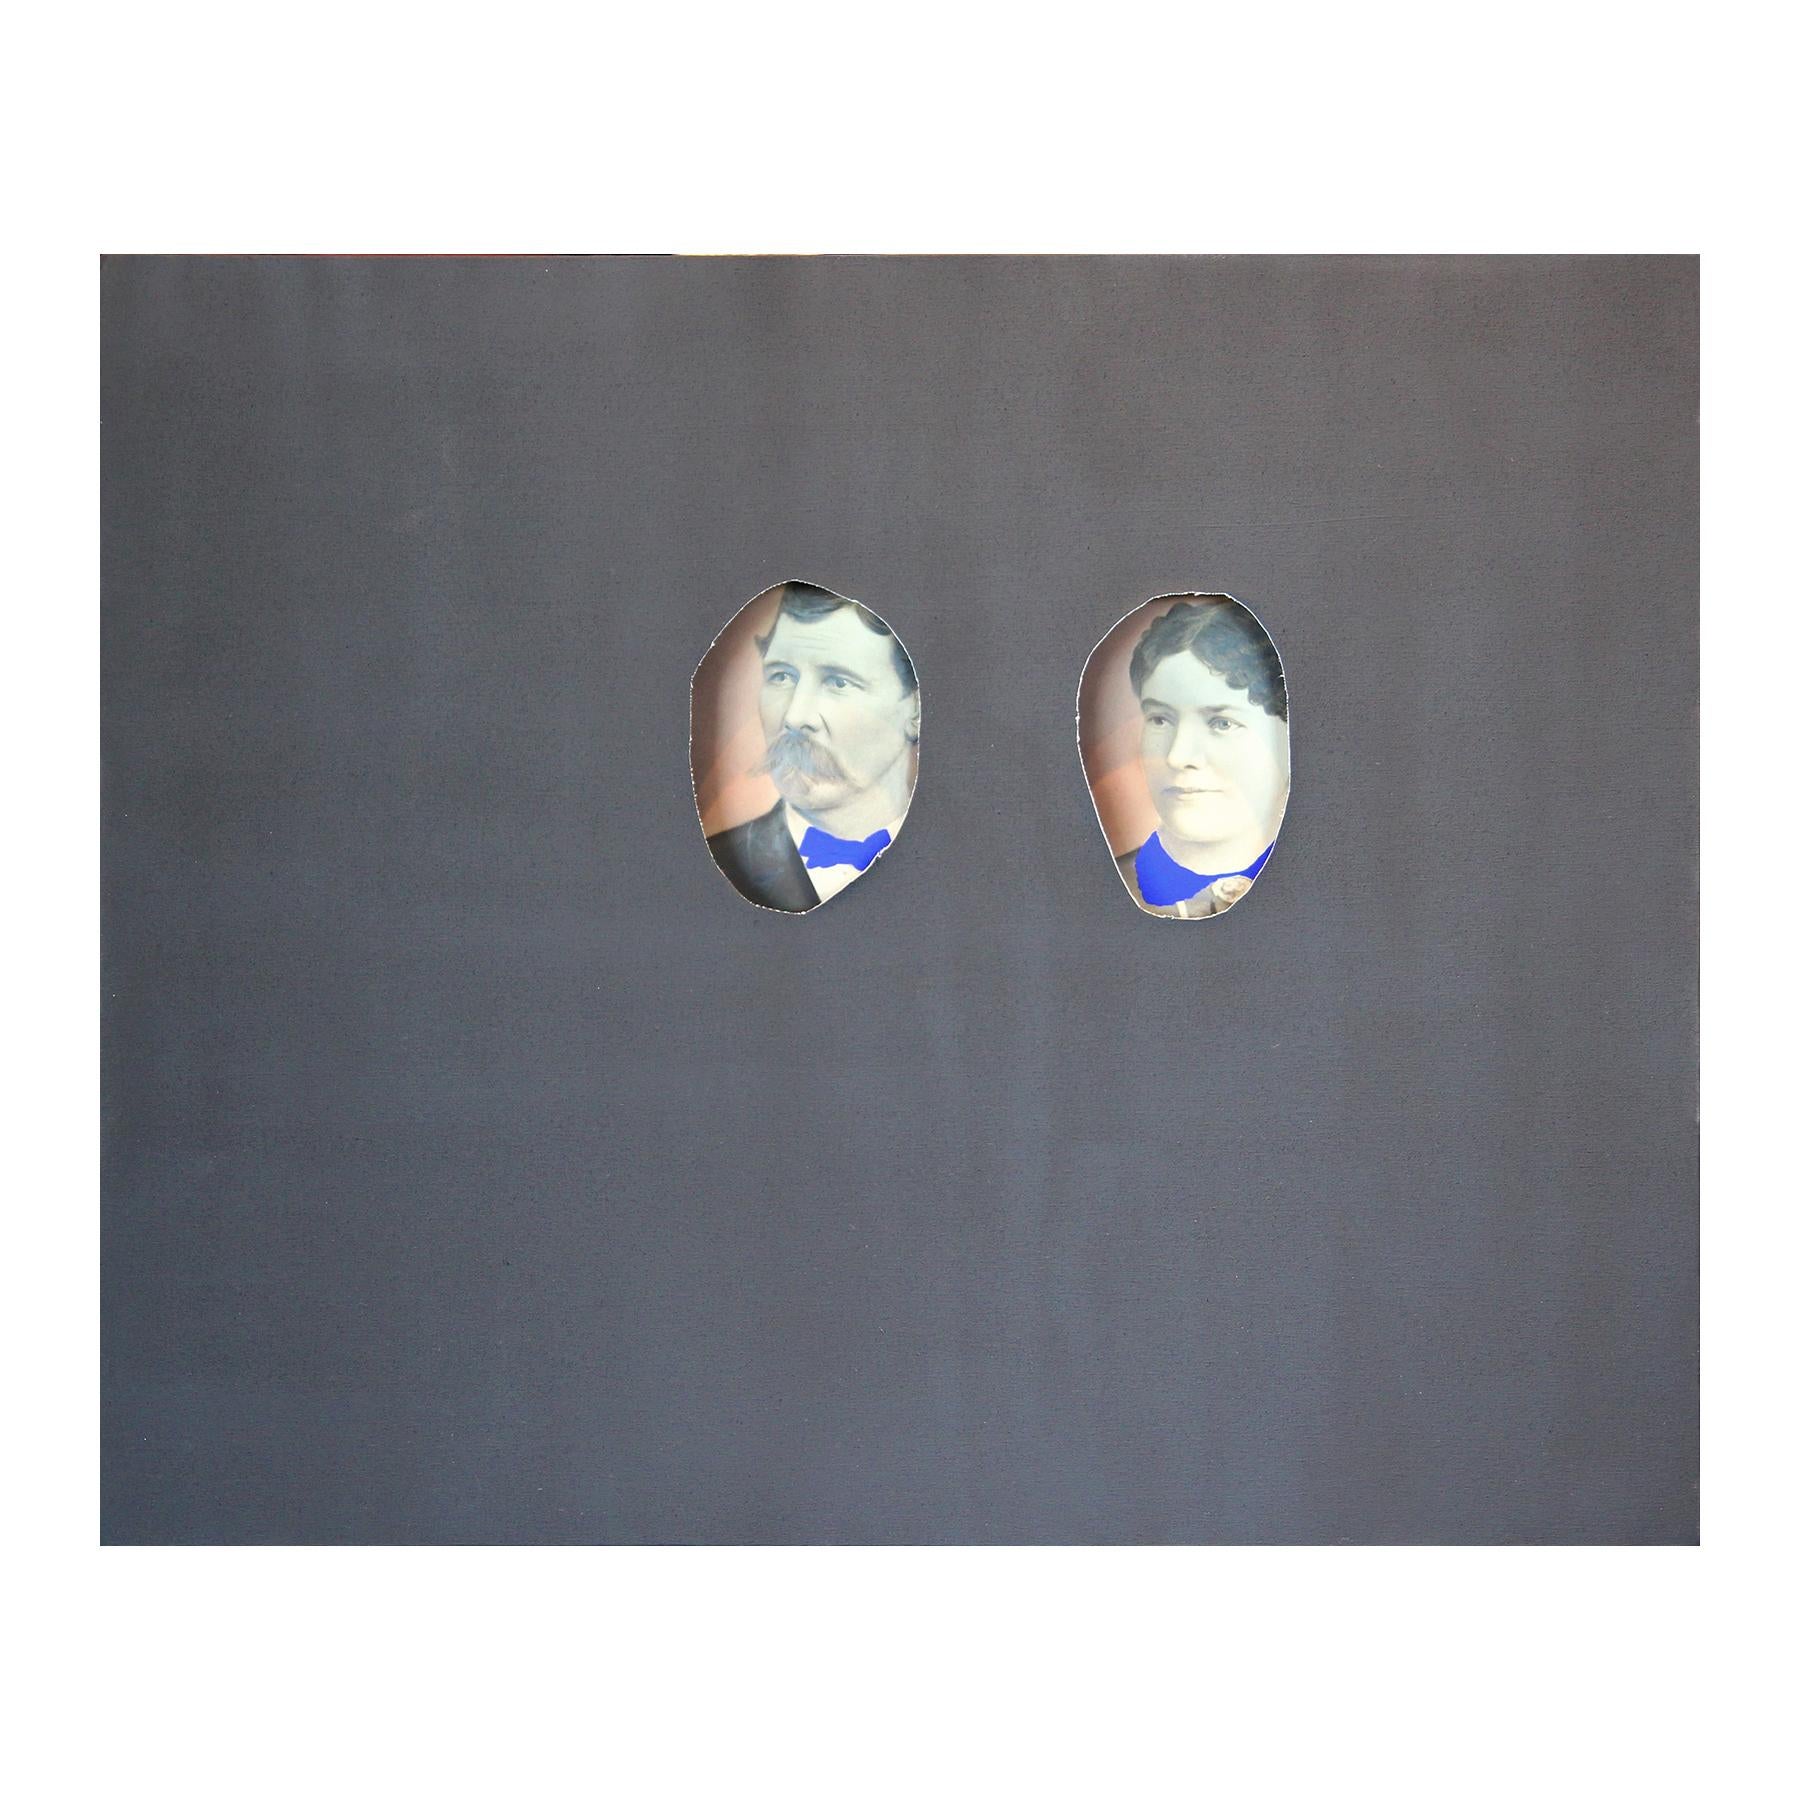 Matthew Reeves Abstract Painting - Black Canvas Wrapped Portrait of a Couple with Painted Bright Blue Collars